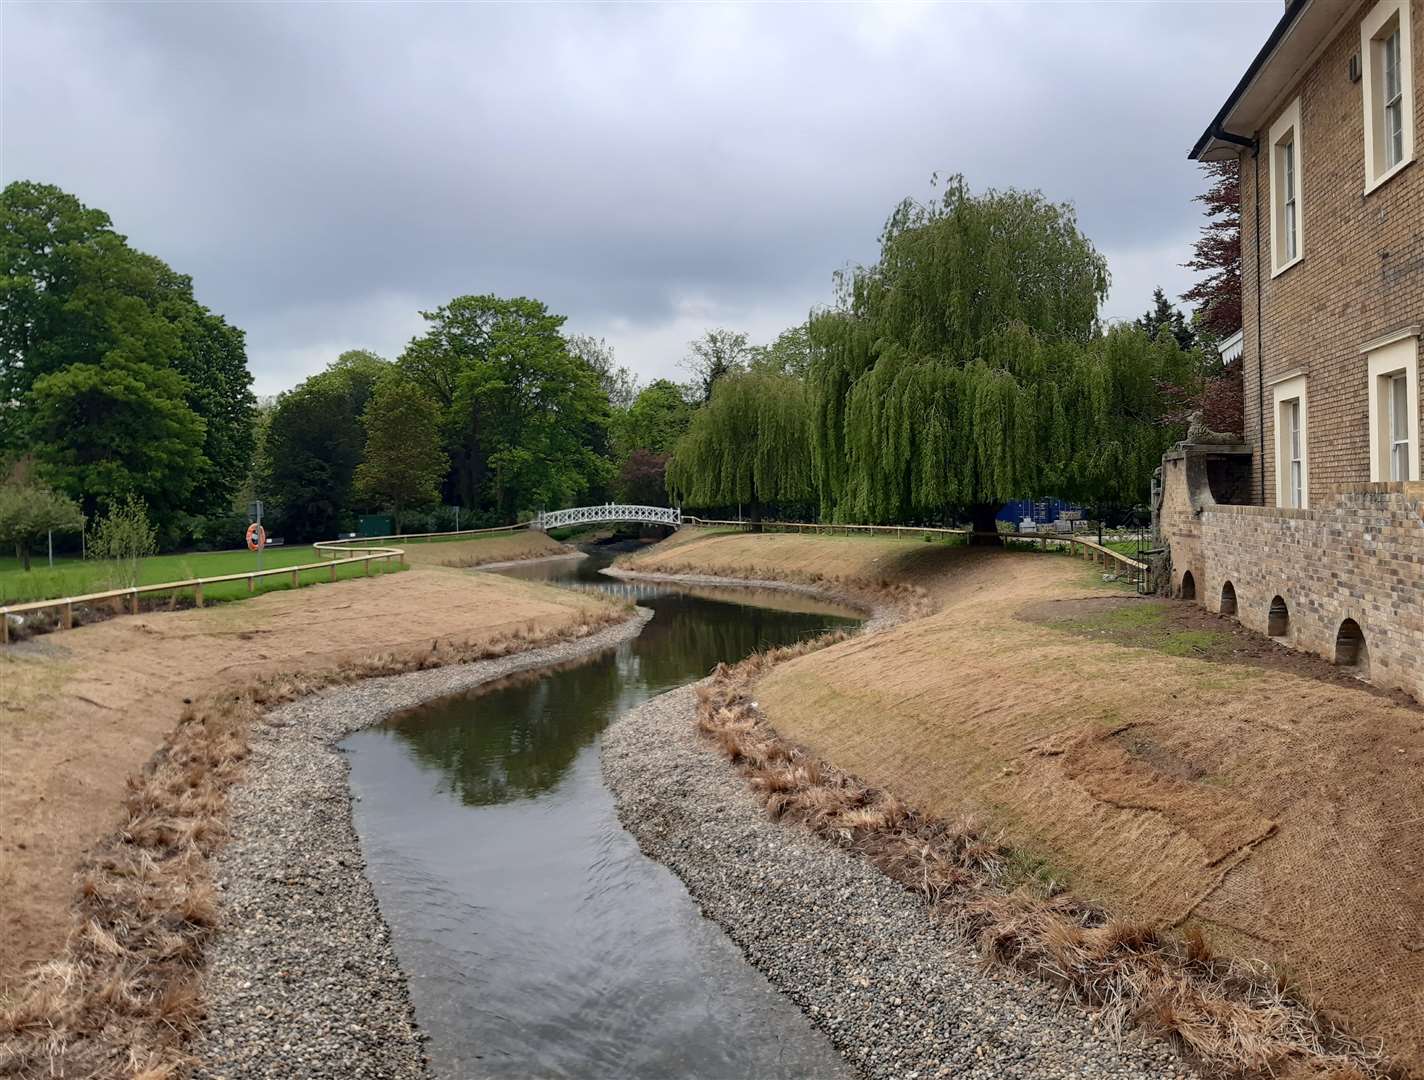 River Darent restoration work has also been completed on-site. Photo: Sean Delaney